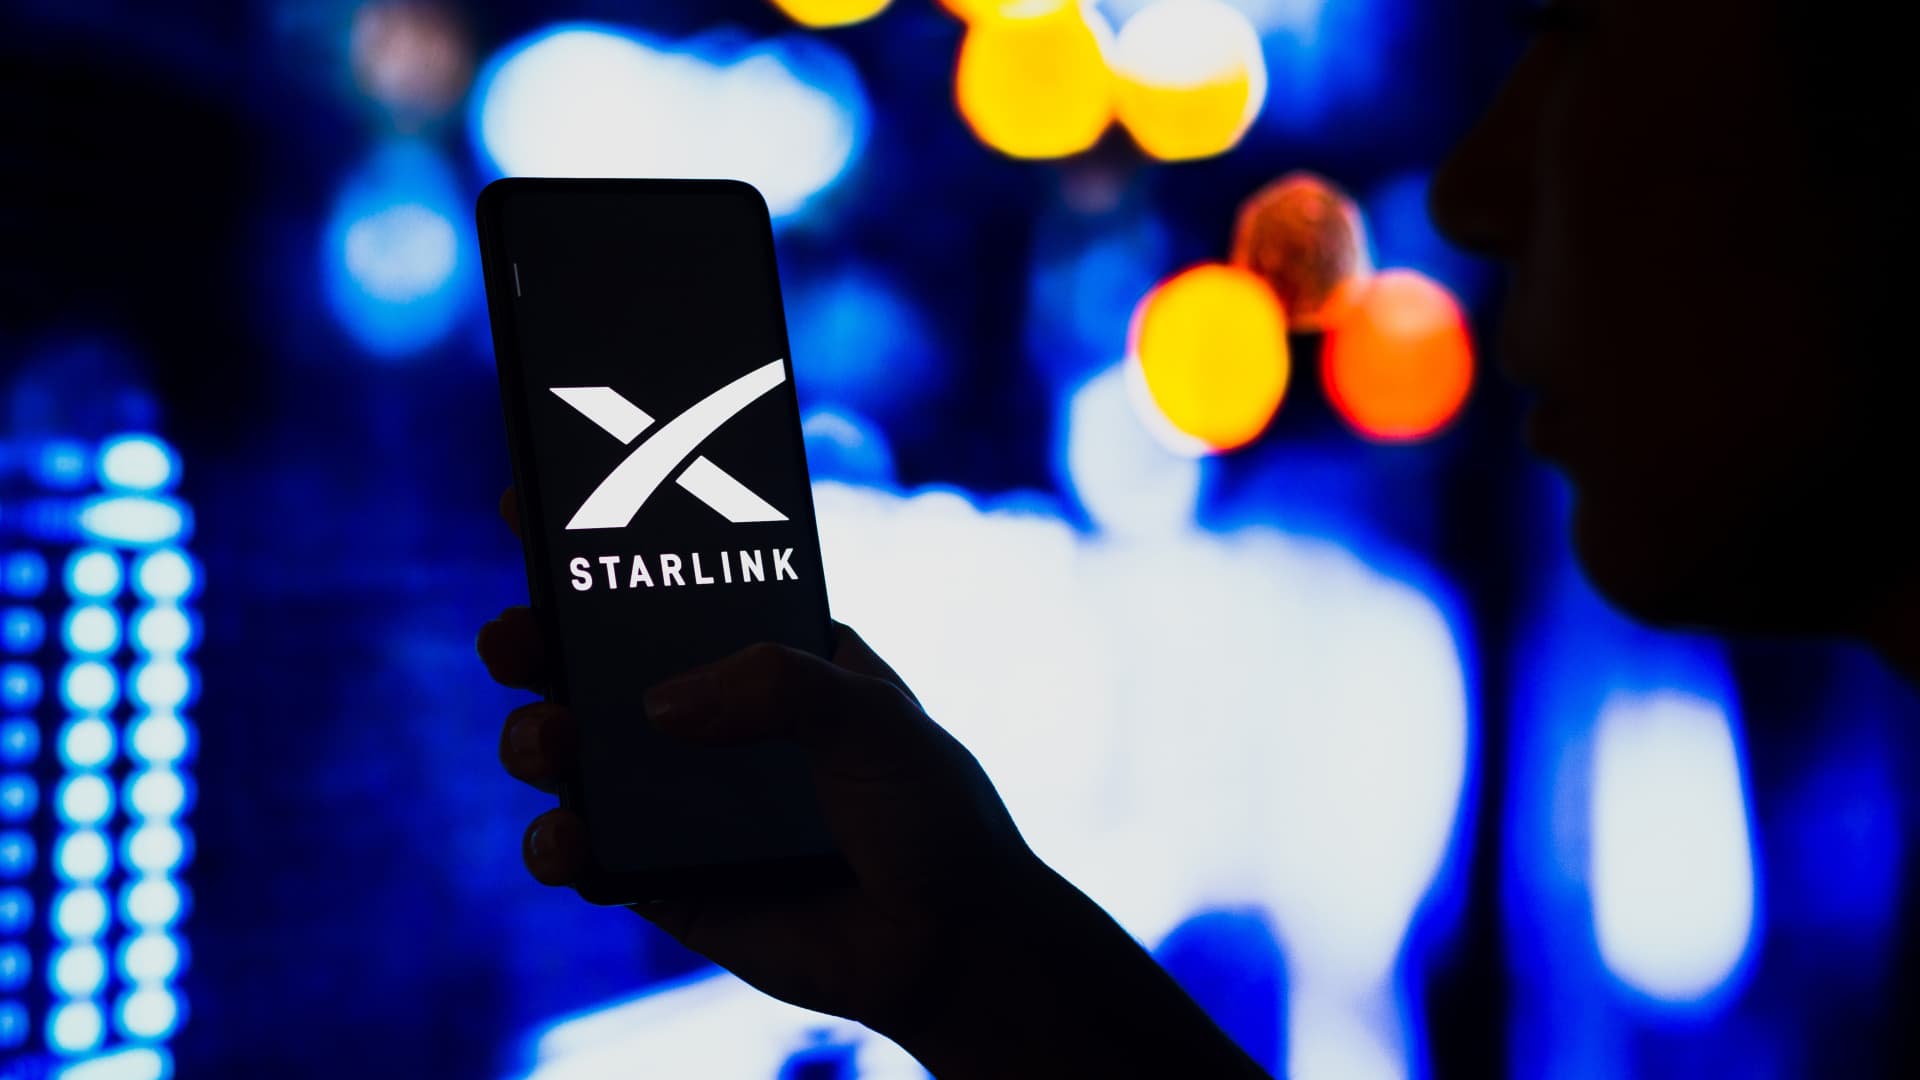 A smartphone with the Starlink logo displayed on the screen.